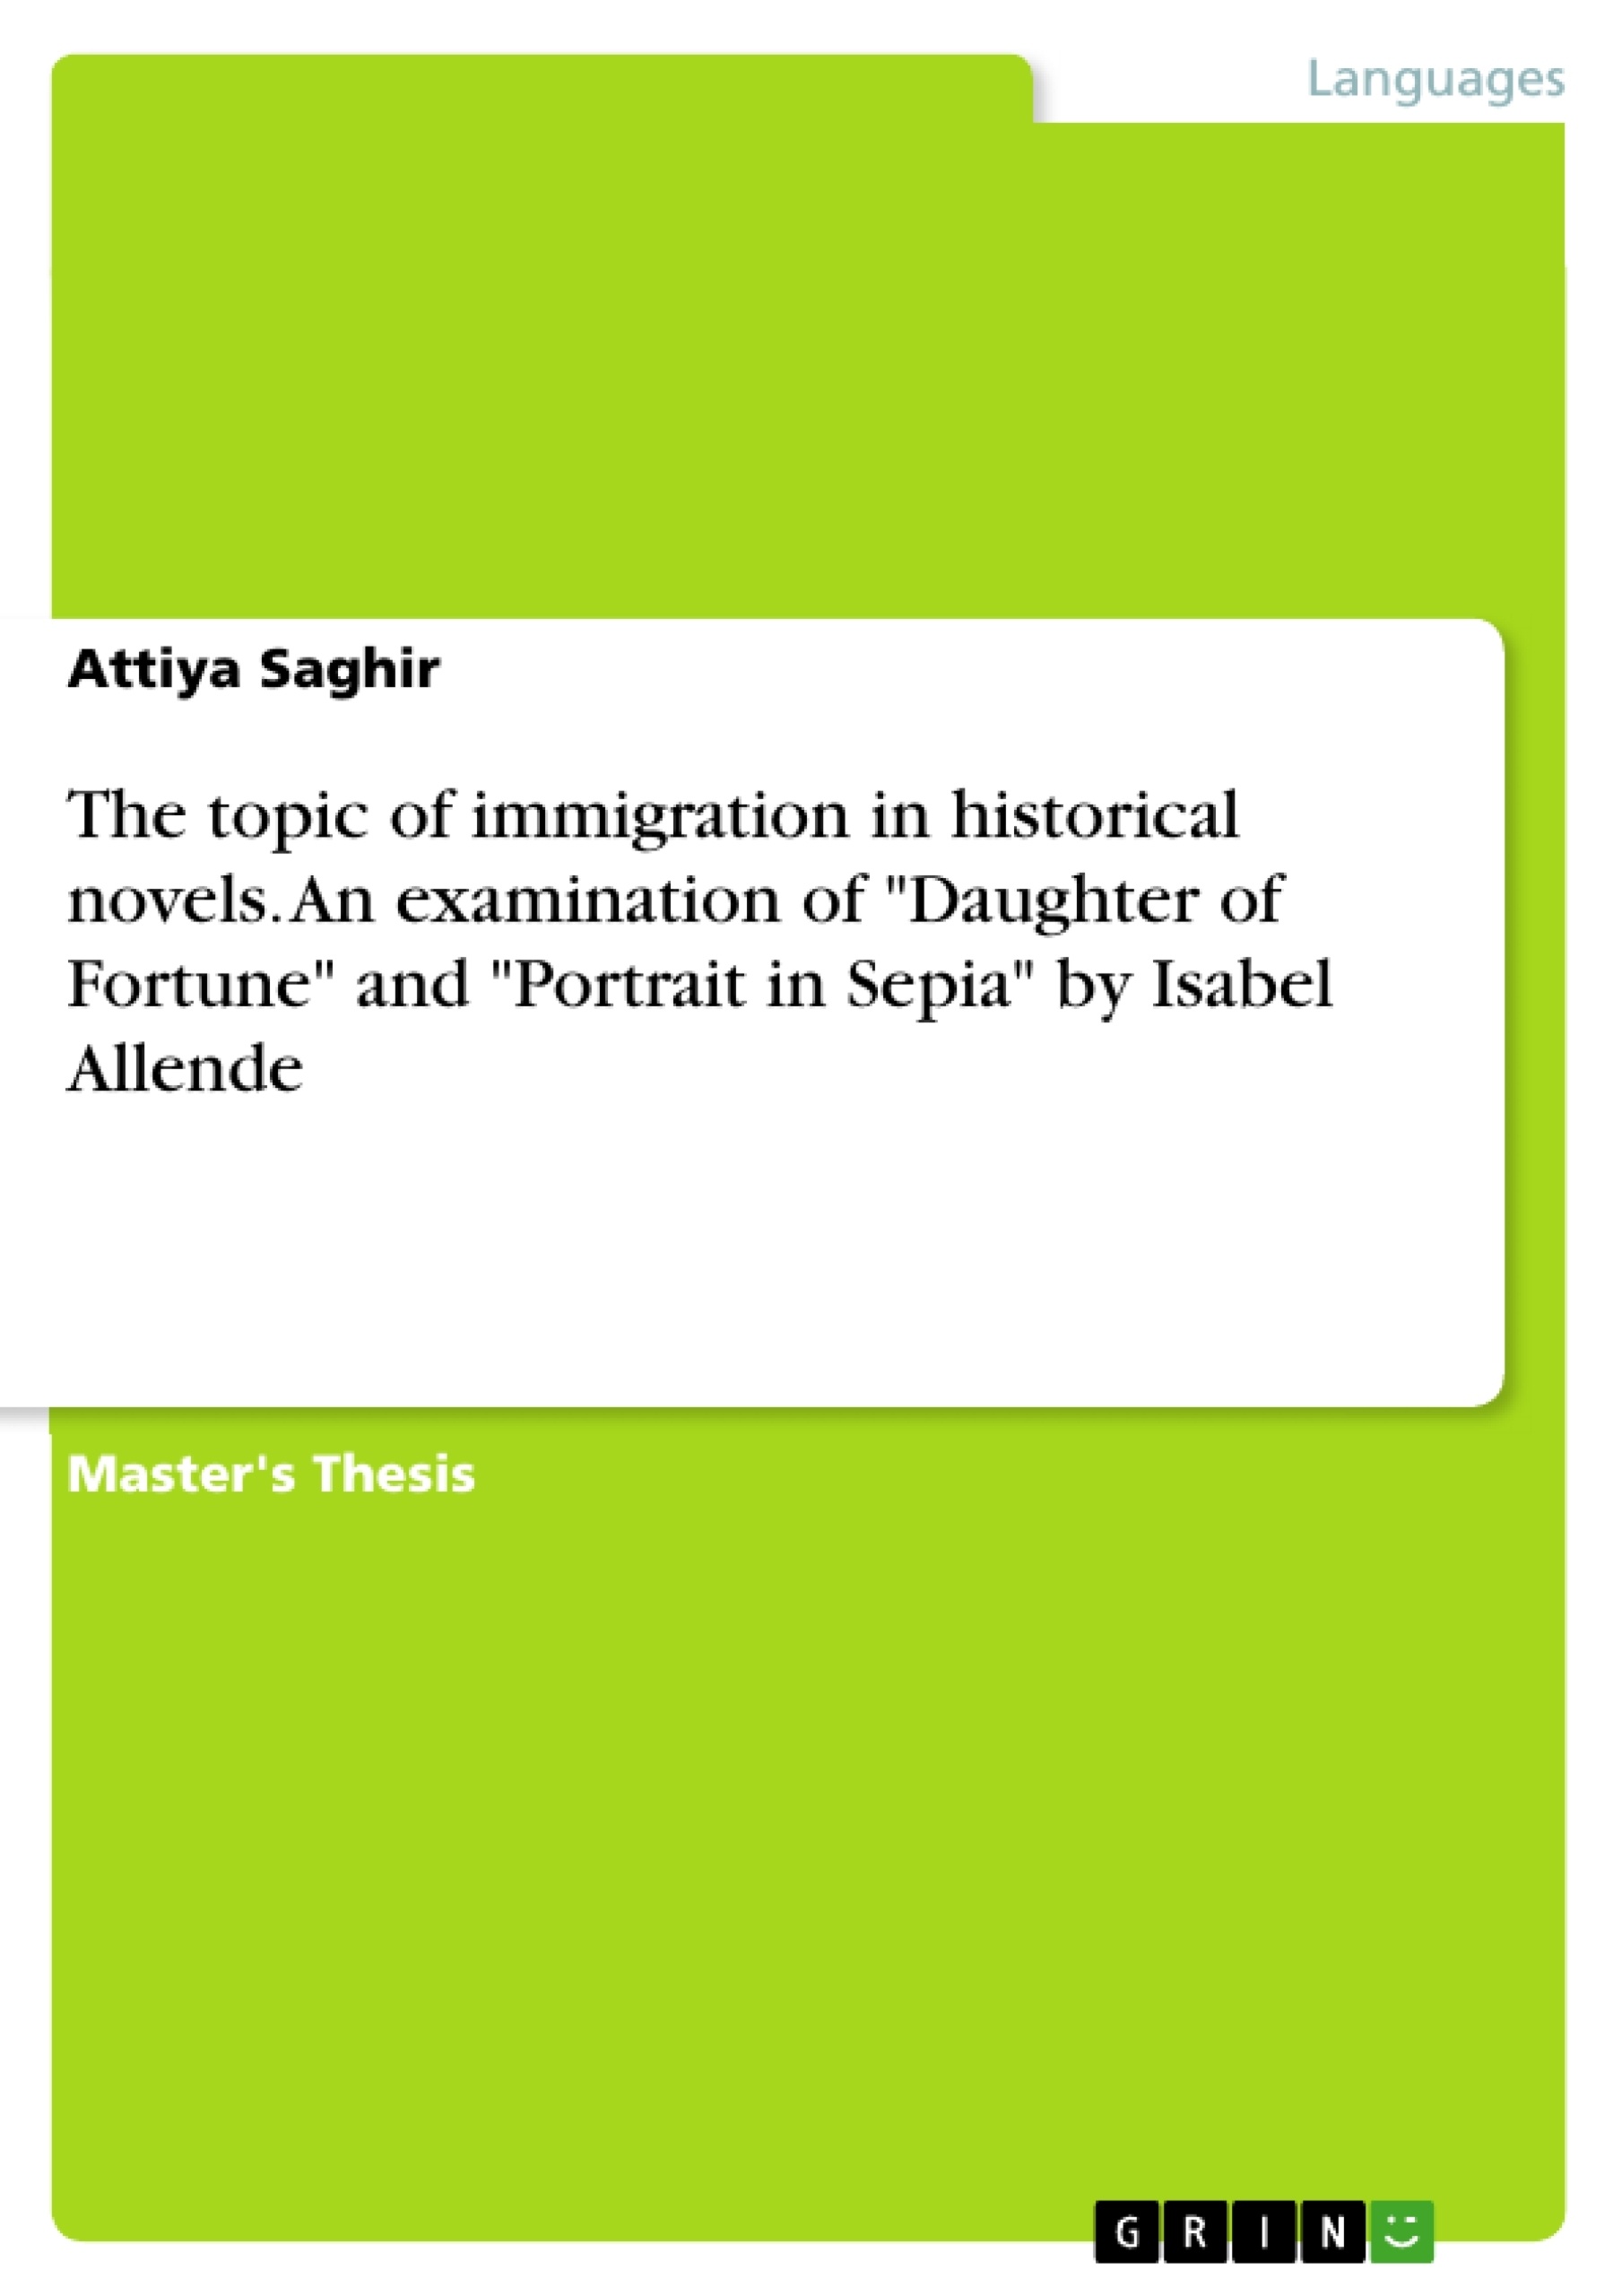 Título: The topic of immigration in historical novels. An examination of "Daughter of Fortune" and "Portrait in Sepia" by Isabel Allende